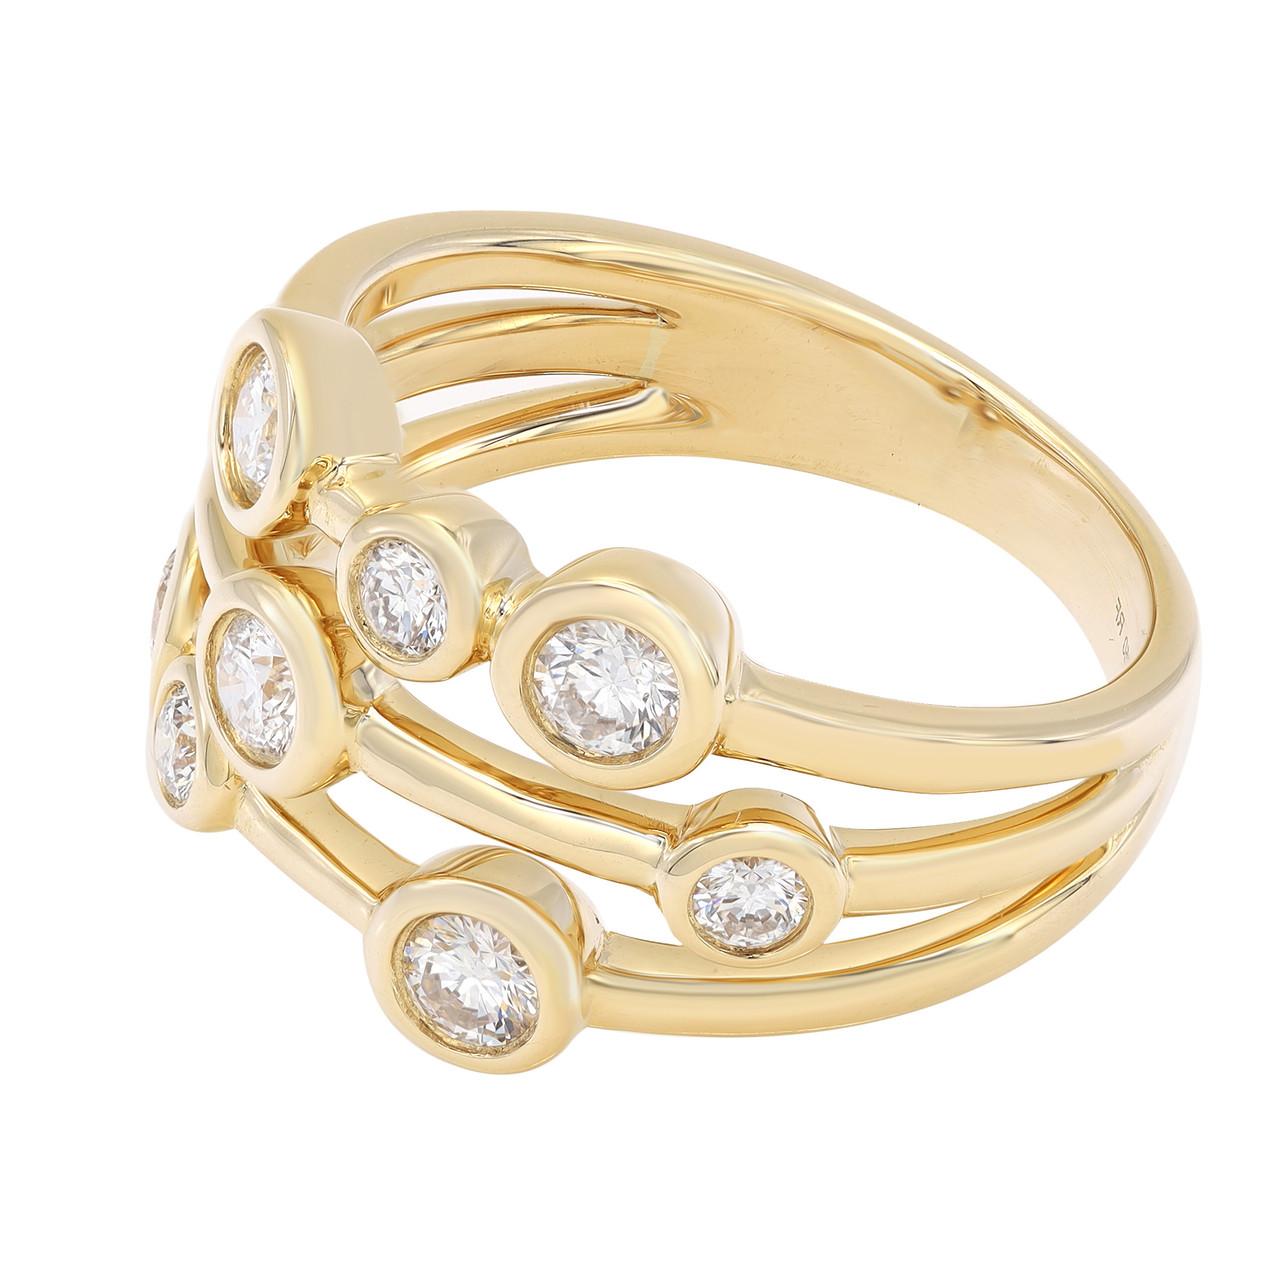 Introducing the modern and elegant 0.69 Carat Diamond Bubble Ring in 18K Yellow Gold. This bezel set diamond ring is a true symbol of celebrating life's precious milestones. Crafted with care in 18K gold, it features a continuous arrangement of